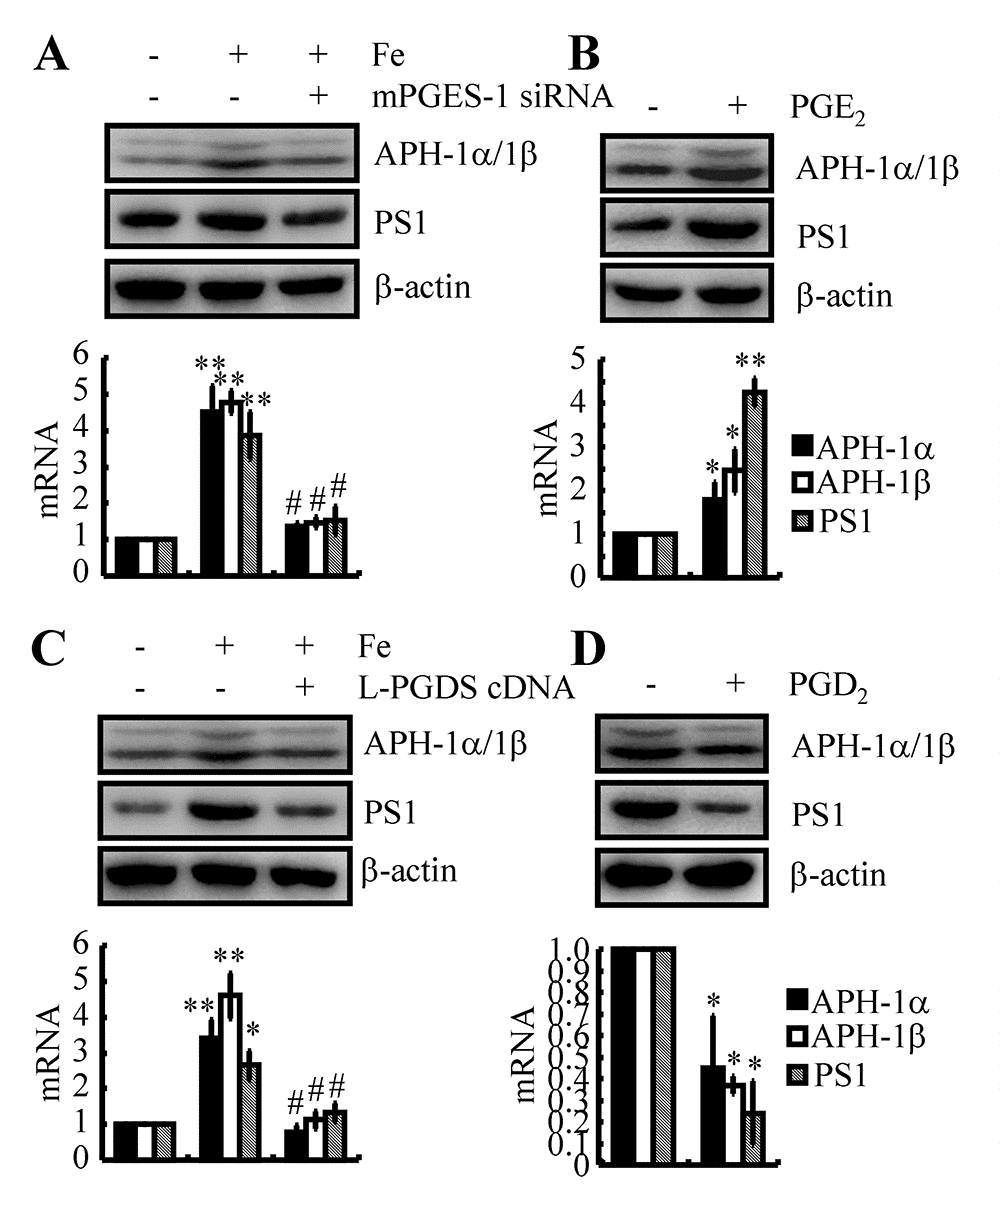 PGE2 and PGD2 antagonistically regulated the expression of APH-1α/1β and PS1 in n2a cells. (A, C) n2a cells were treated with Fe (10 μM) in the absence or presence of siRNA-targeted mPGES-1 or L-PGDS cDNA. (B, D) n2a cells were treated with PGE2 (10 μM) or PGD2 (1 μM) for 48 h. APH-1α/1β and PS1 were determined by qRT-PCR and western blots, respectively. GAPDH and β-actin served as internal controls. *p; **p compared with vehicle-treated controls. # p with respect to Fe-treatment alone.